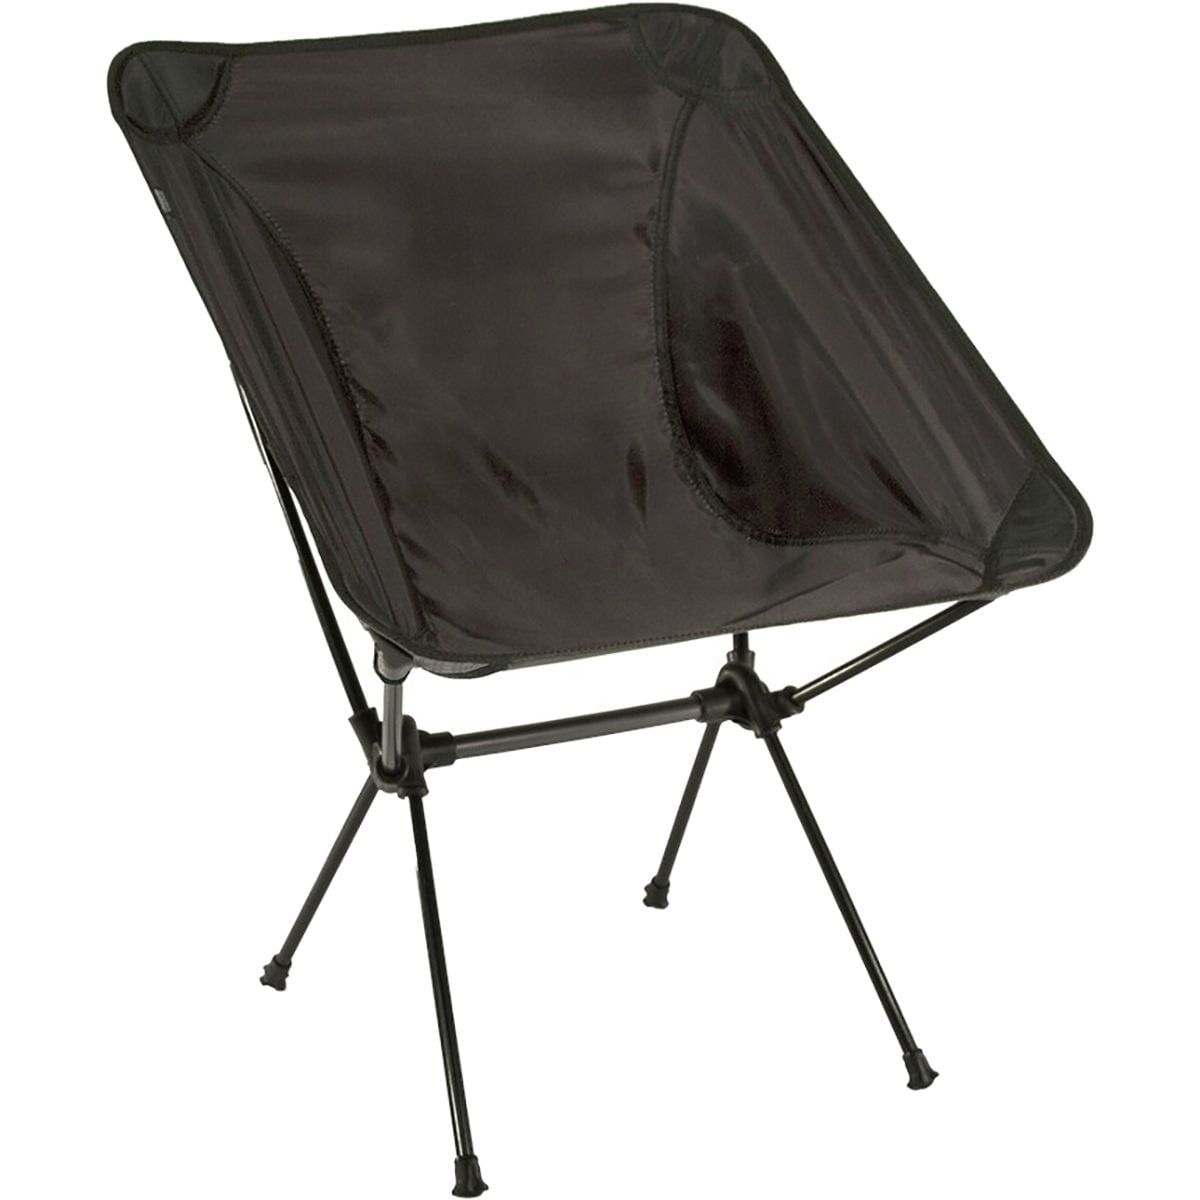 TravelChair C-series Joey Folding Portable Camp Chair Black for 